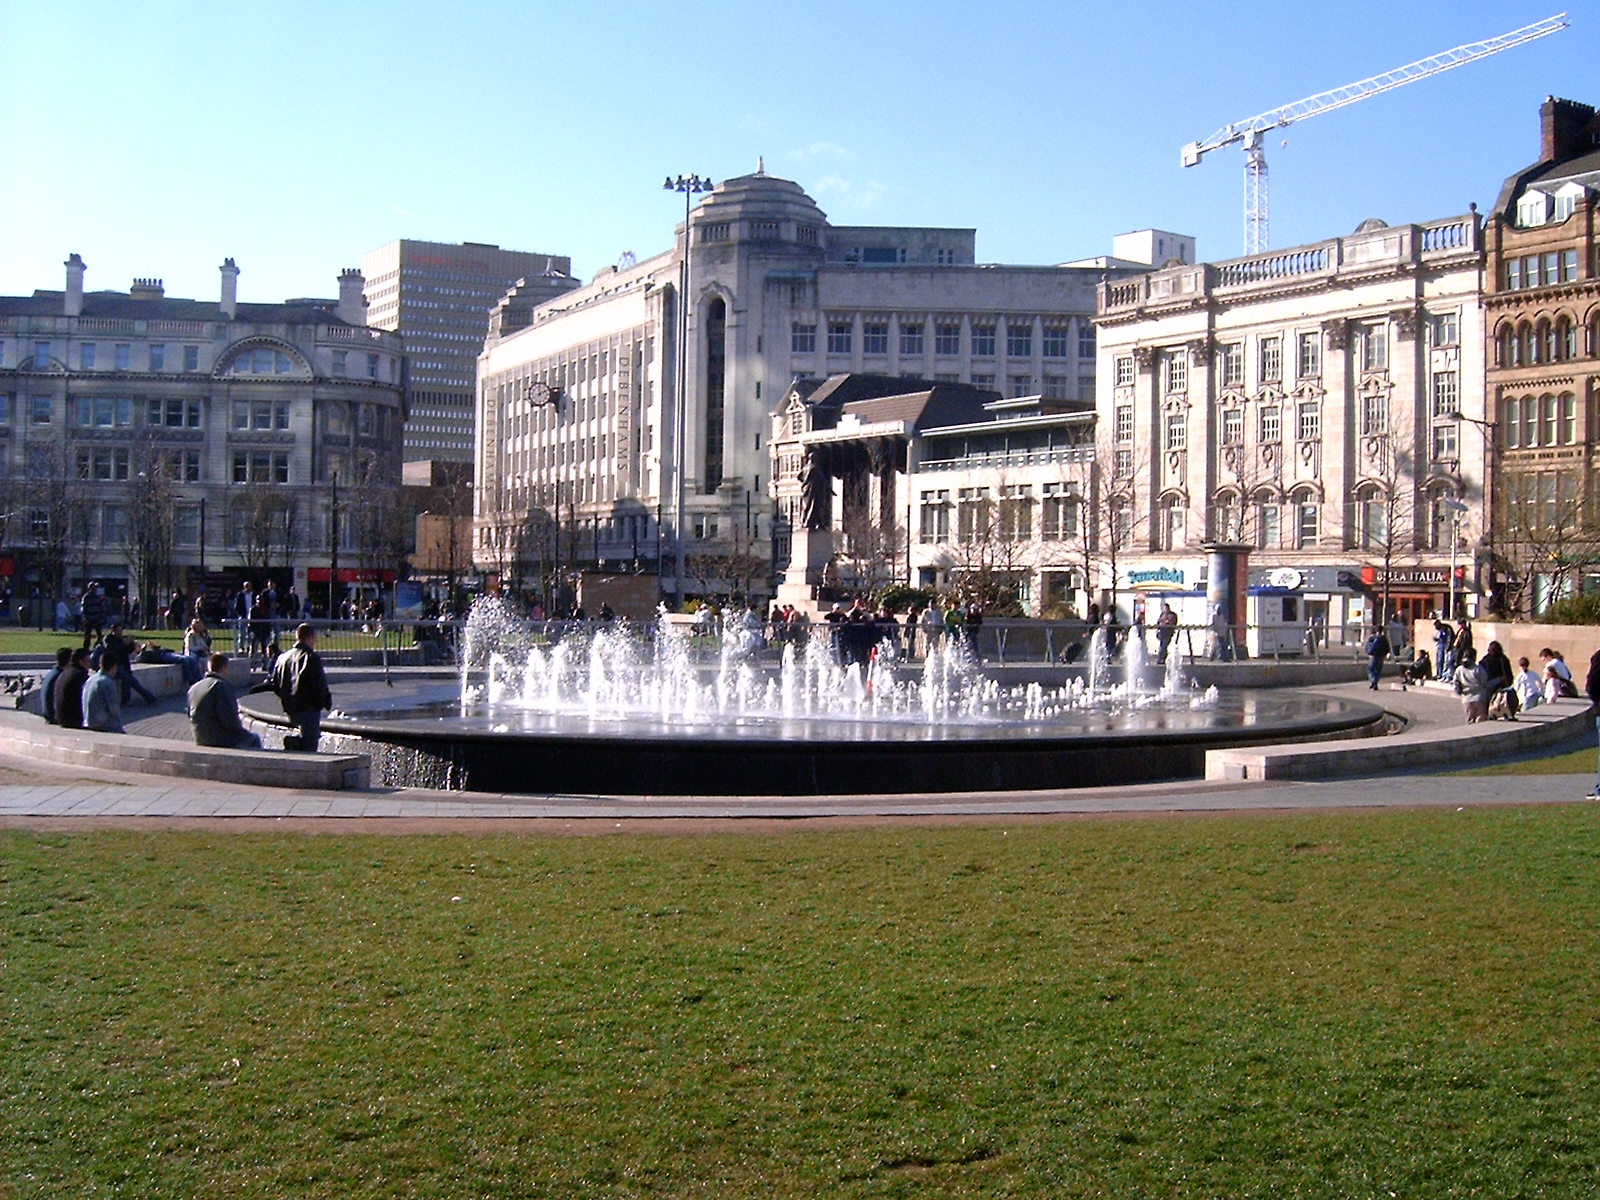 Piccadilly Gardens, a green space in the city (view towards Market Street)